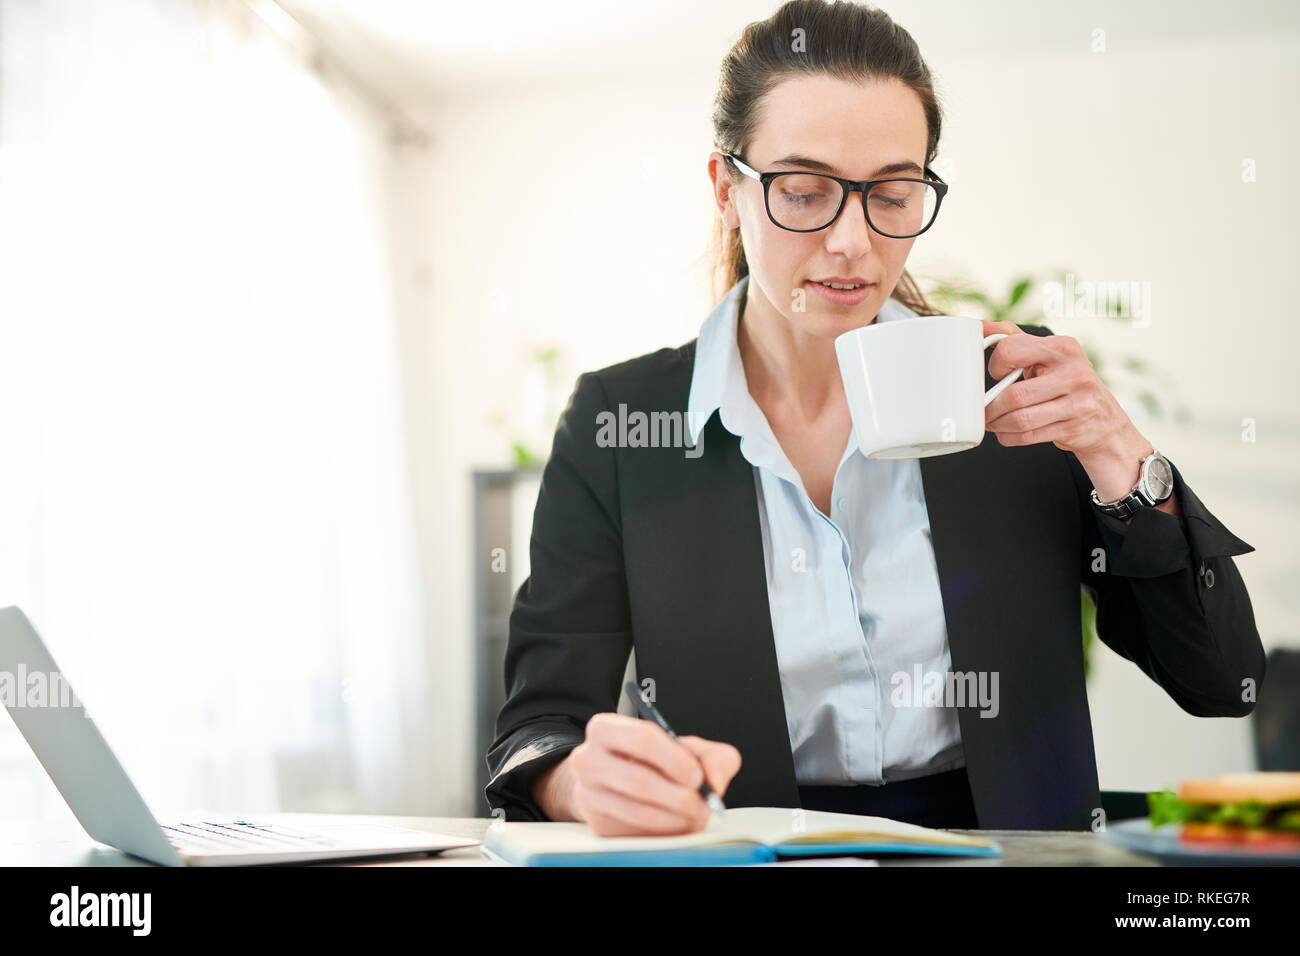 Young Businesswoman Drinking Coffee Banque D'Images